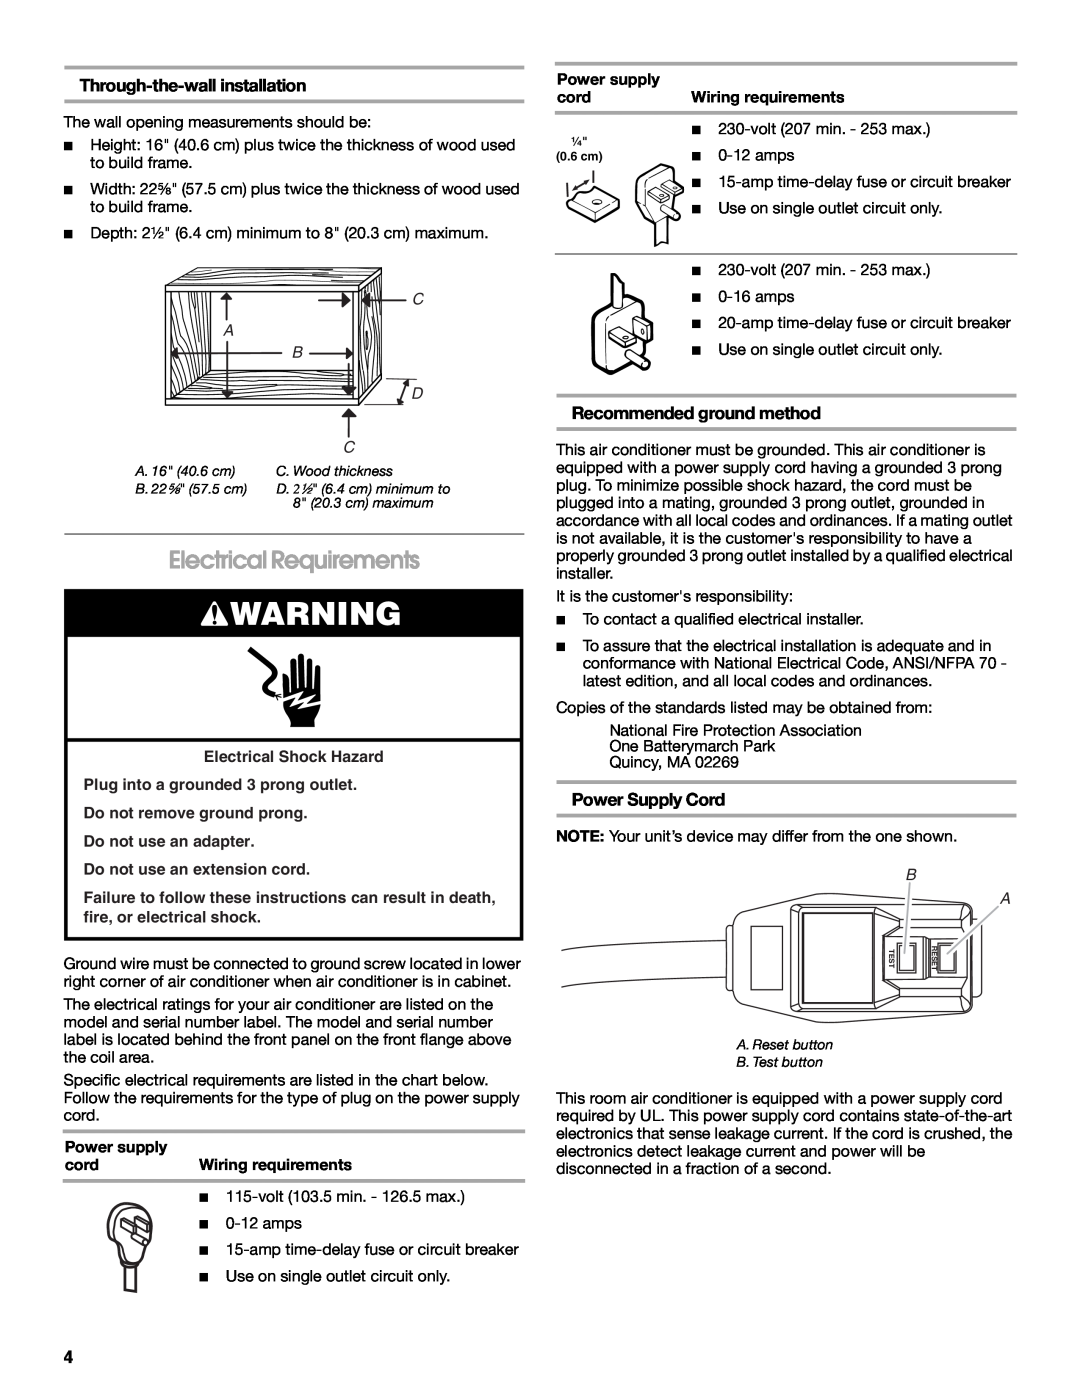 Whirlpool ACE082XR0 Electrical Requirements, Through-the-wallinstallation, Recommended ground method, Power Supply Cord 